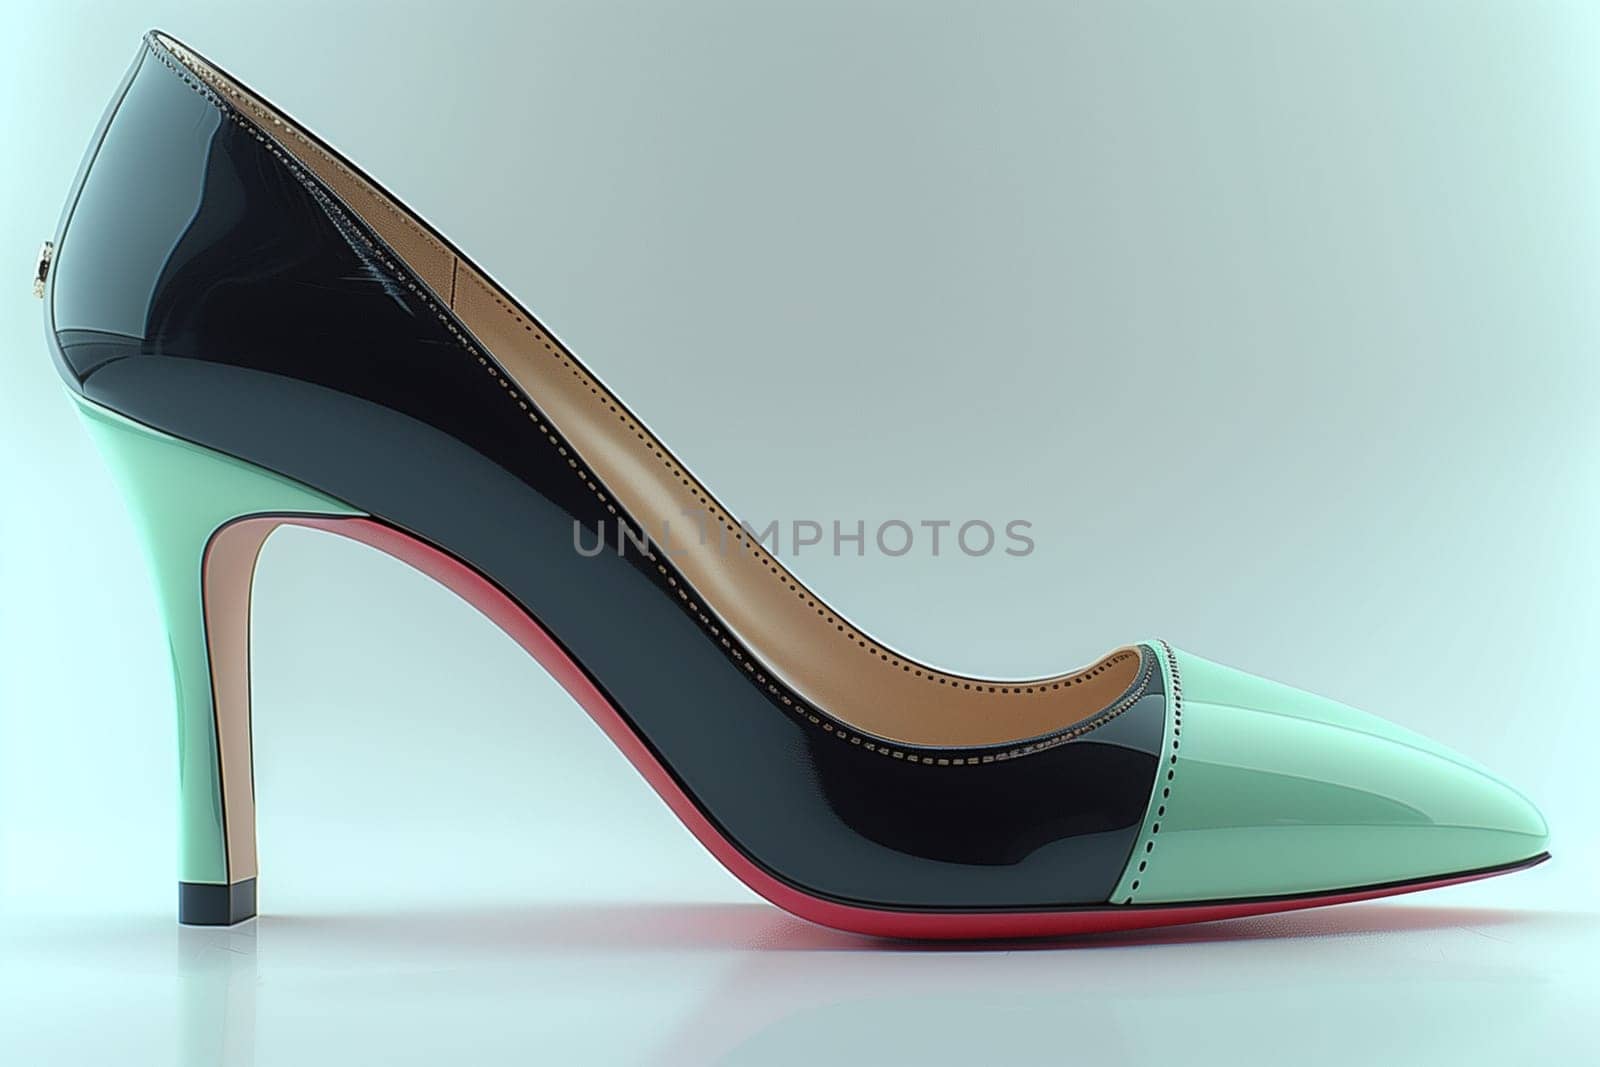 Green and Black High Heeled Shoe on White Surface by Sd28DimoN_1976